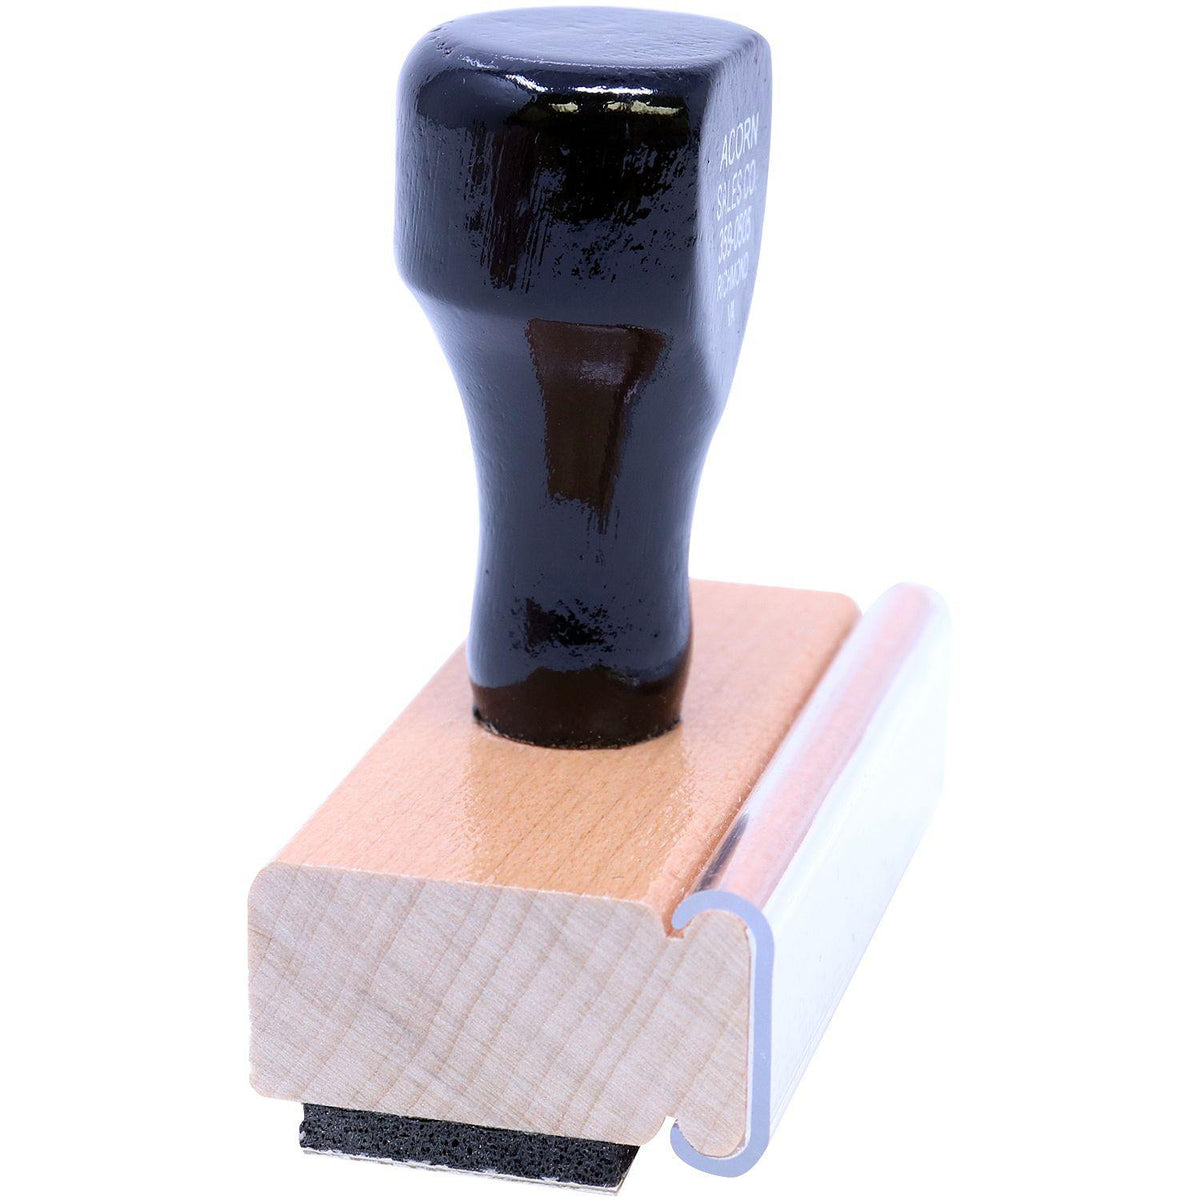 Side View of Billed with Date Box Rubber Stamp at an Angle